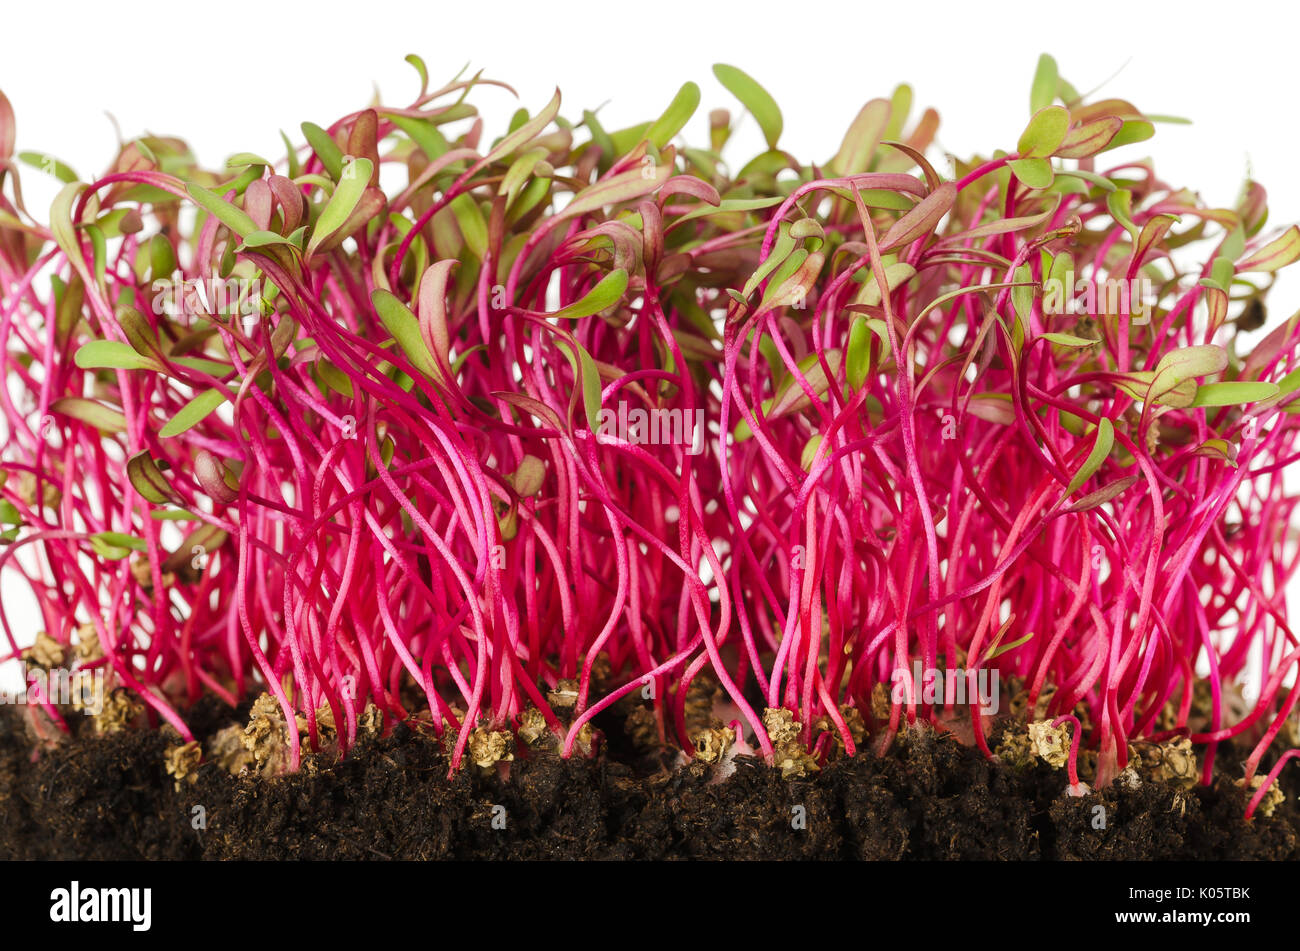 Red beetroot, fresh sprouts and young leaves front view over white. Vegetable, herb and microgreen. Also beet, table, garden or red beet. Cotyledons. Stock Photo